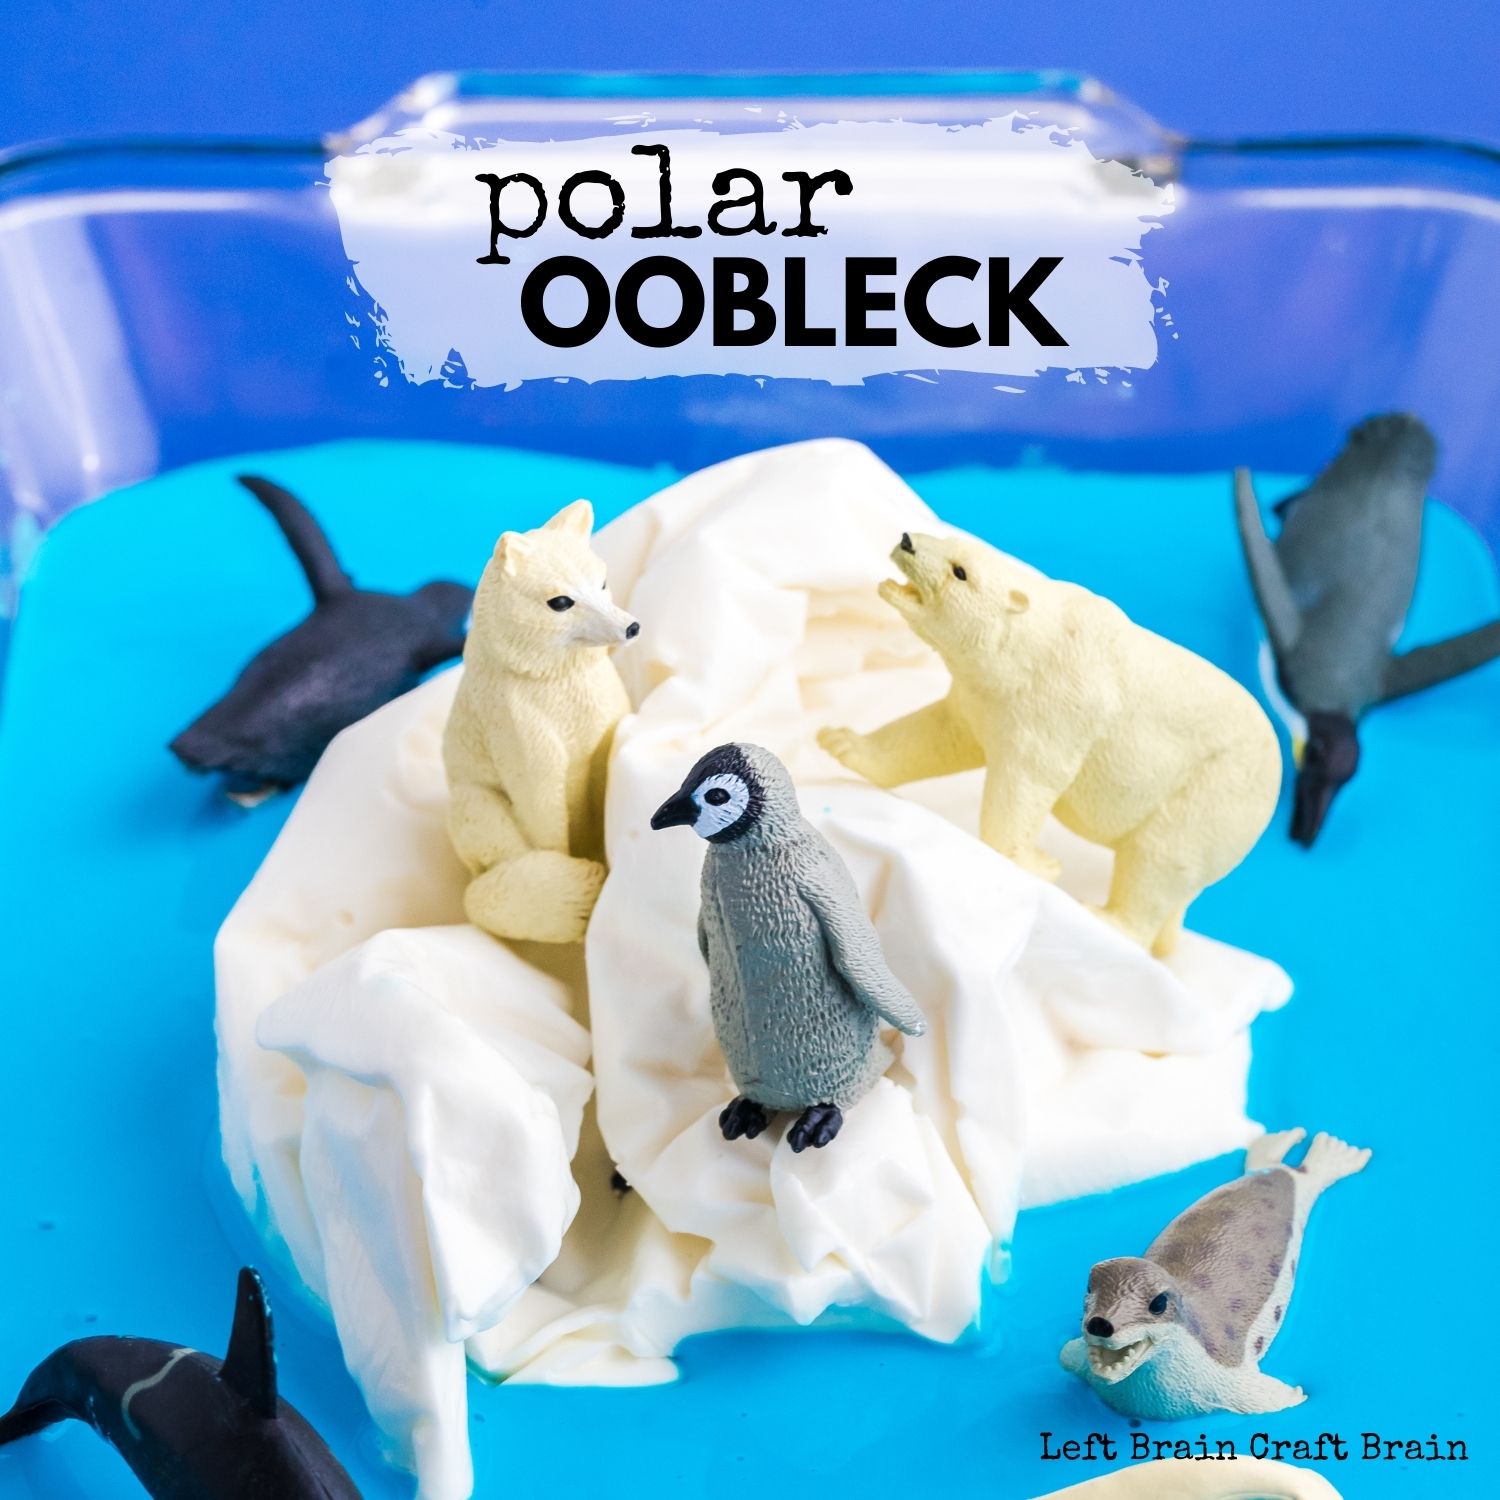 Turn a fun play session into science fun with frozen Polar Oobleck. The kids will learn about animal habitats, chemistry, and climate change.